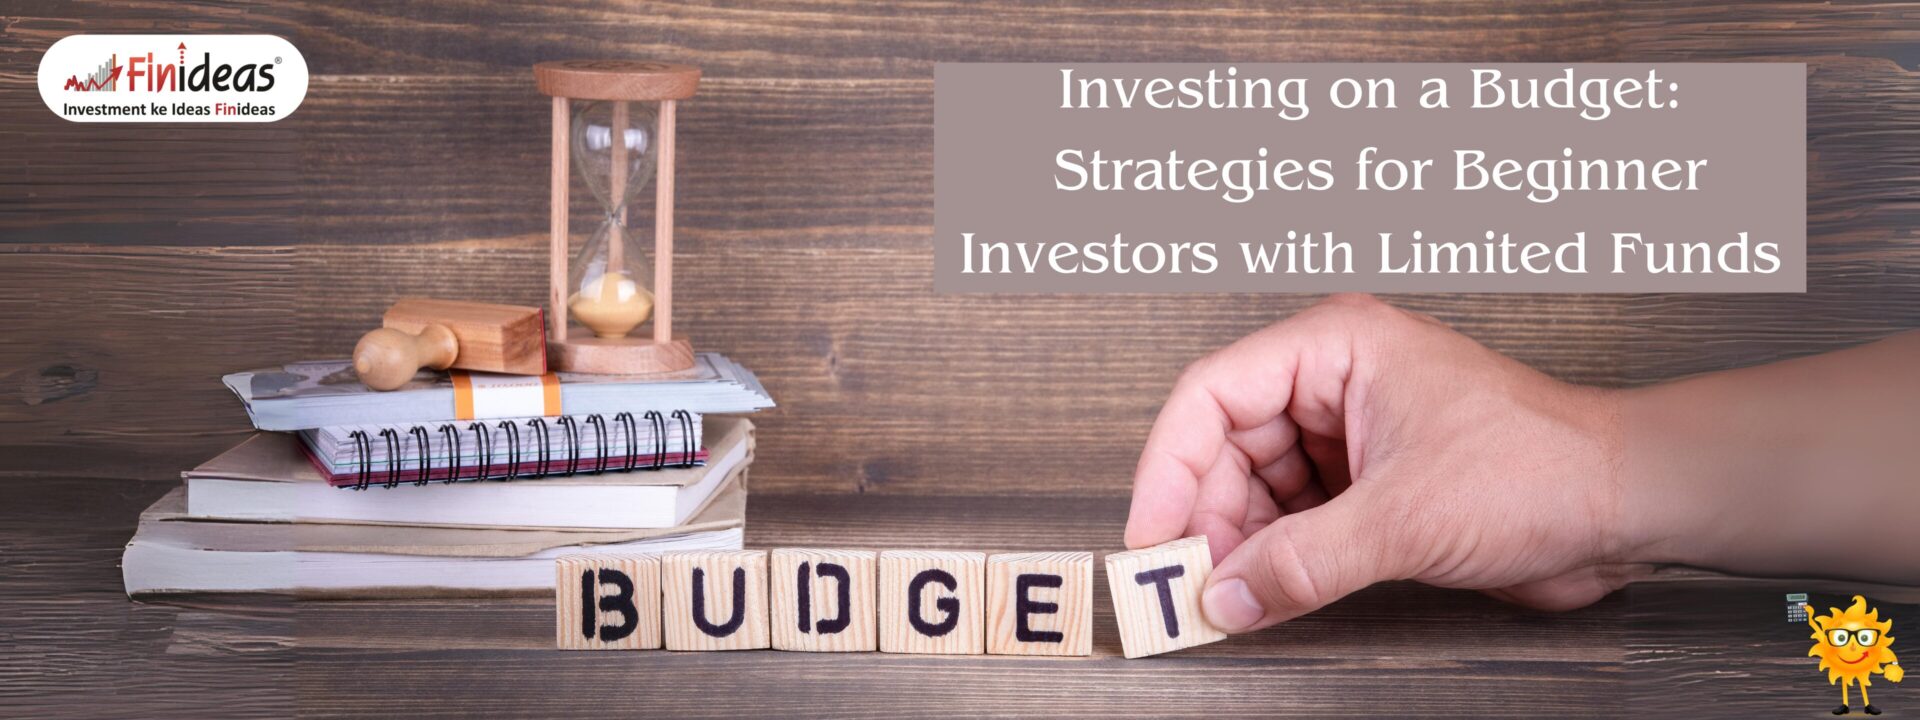 Investing on a Budget Strategies for Beginner Investors with Limited Funds